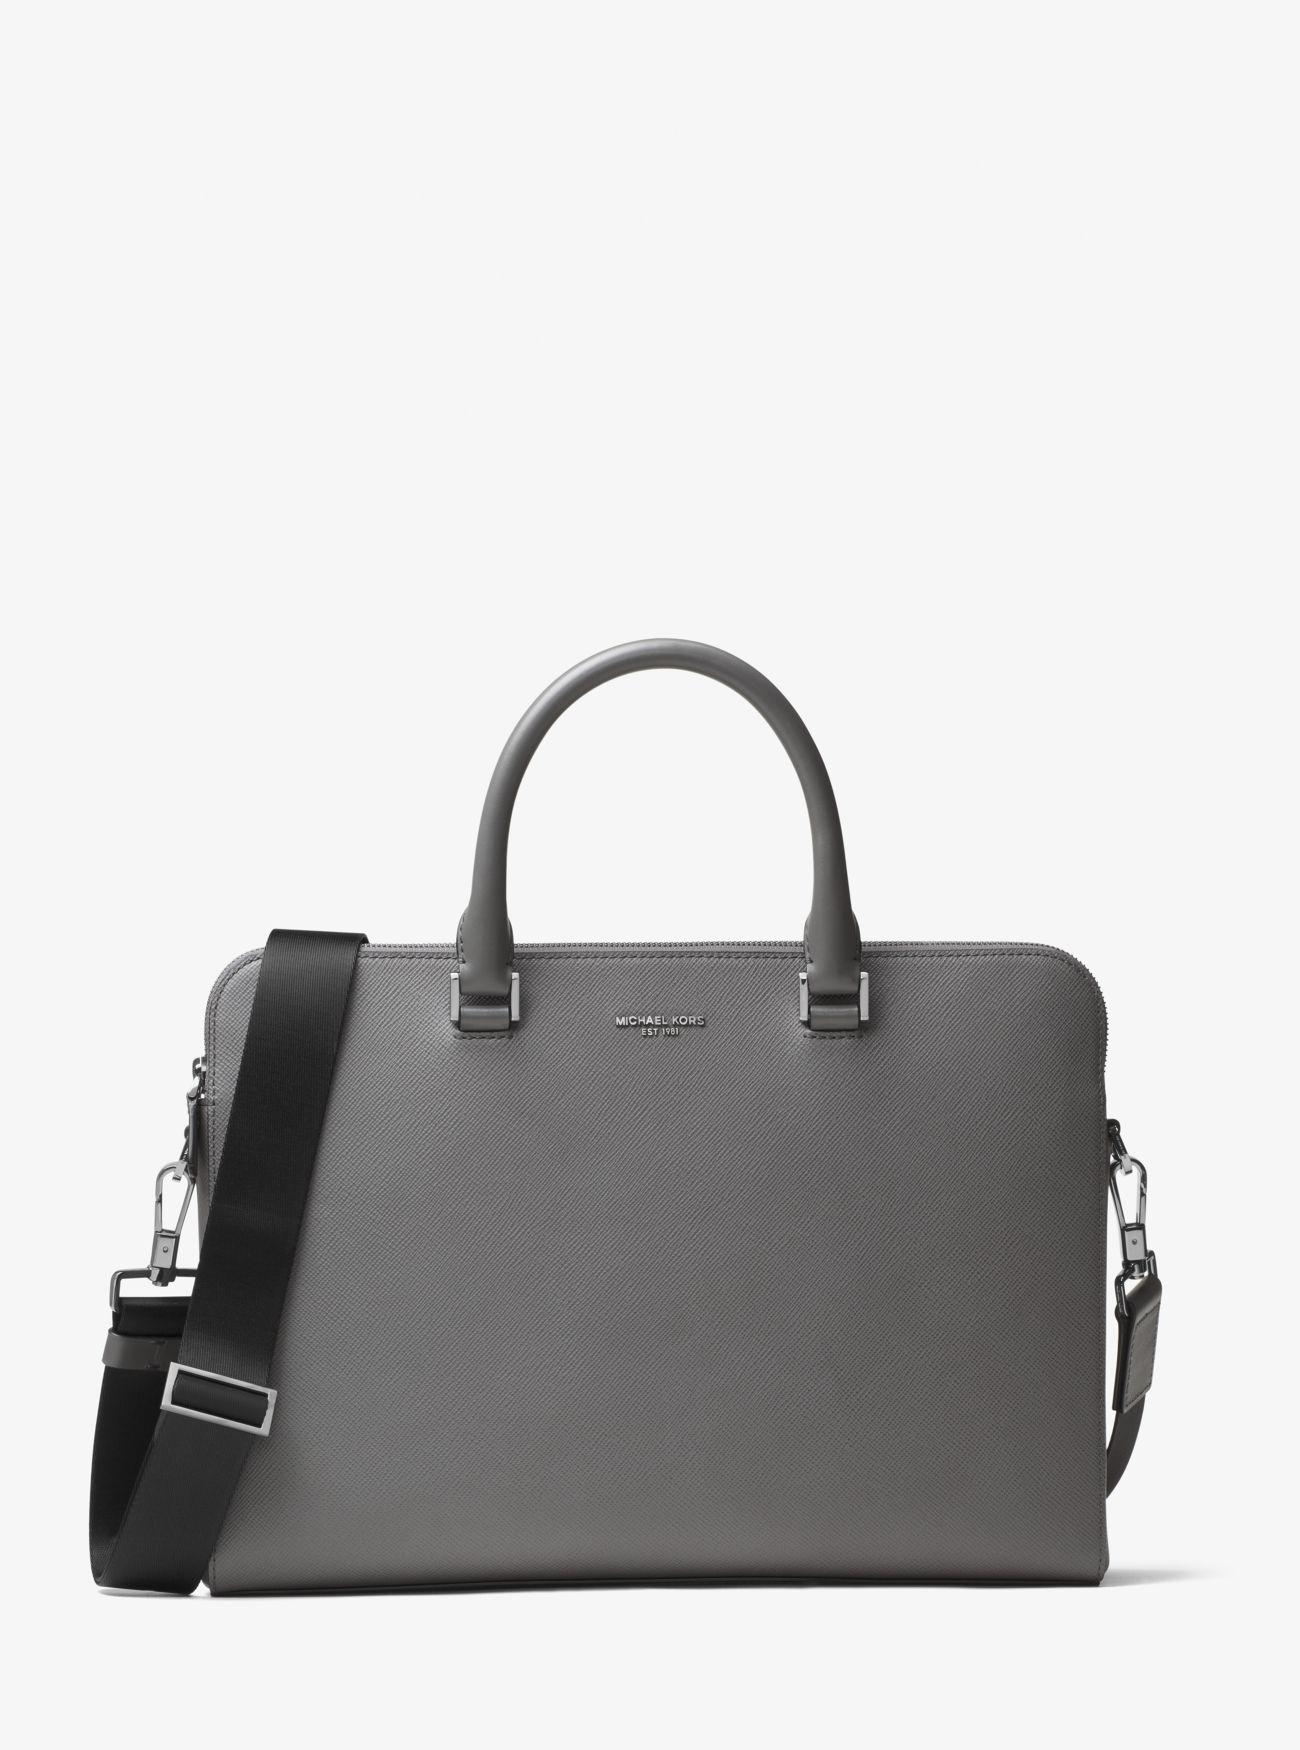 Michael Kors Harrison Leather Briefcase in Grey (Gray) for Men - Lyst